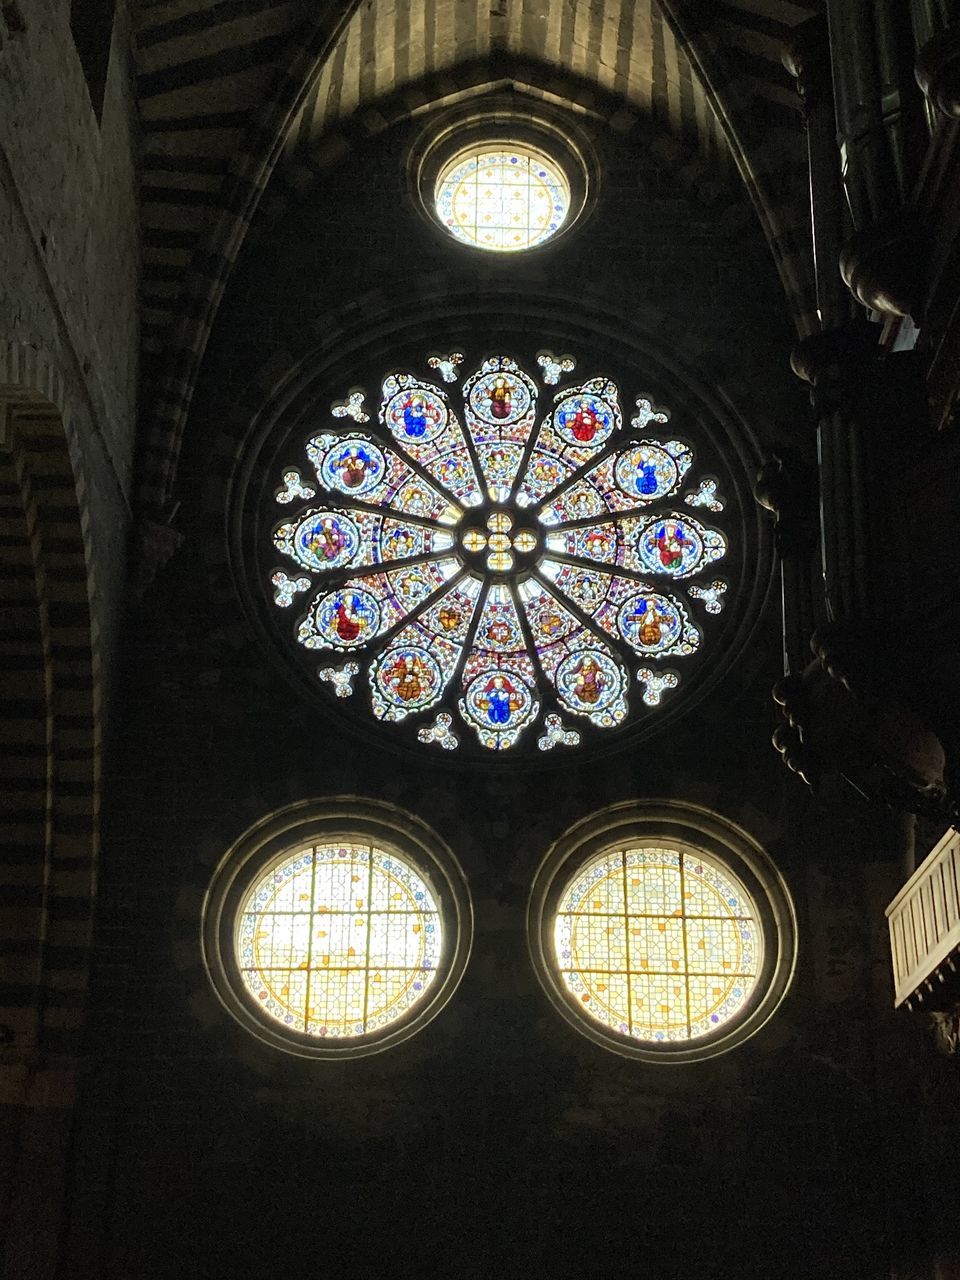 architecture, built structure, stained glass, indoors, glass, place of worship, window, low angle view, no people, light, ceiling, belief, religion, spirituality, building, circle, shape, geometric shape, lighting, catholicism, pattern, sunlight, ornate, travel destinations, arch, rose window